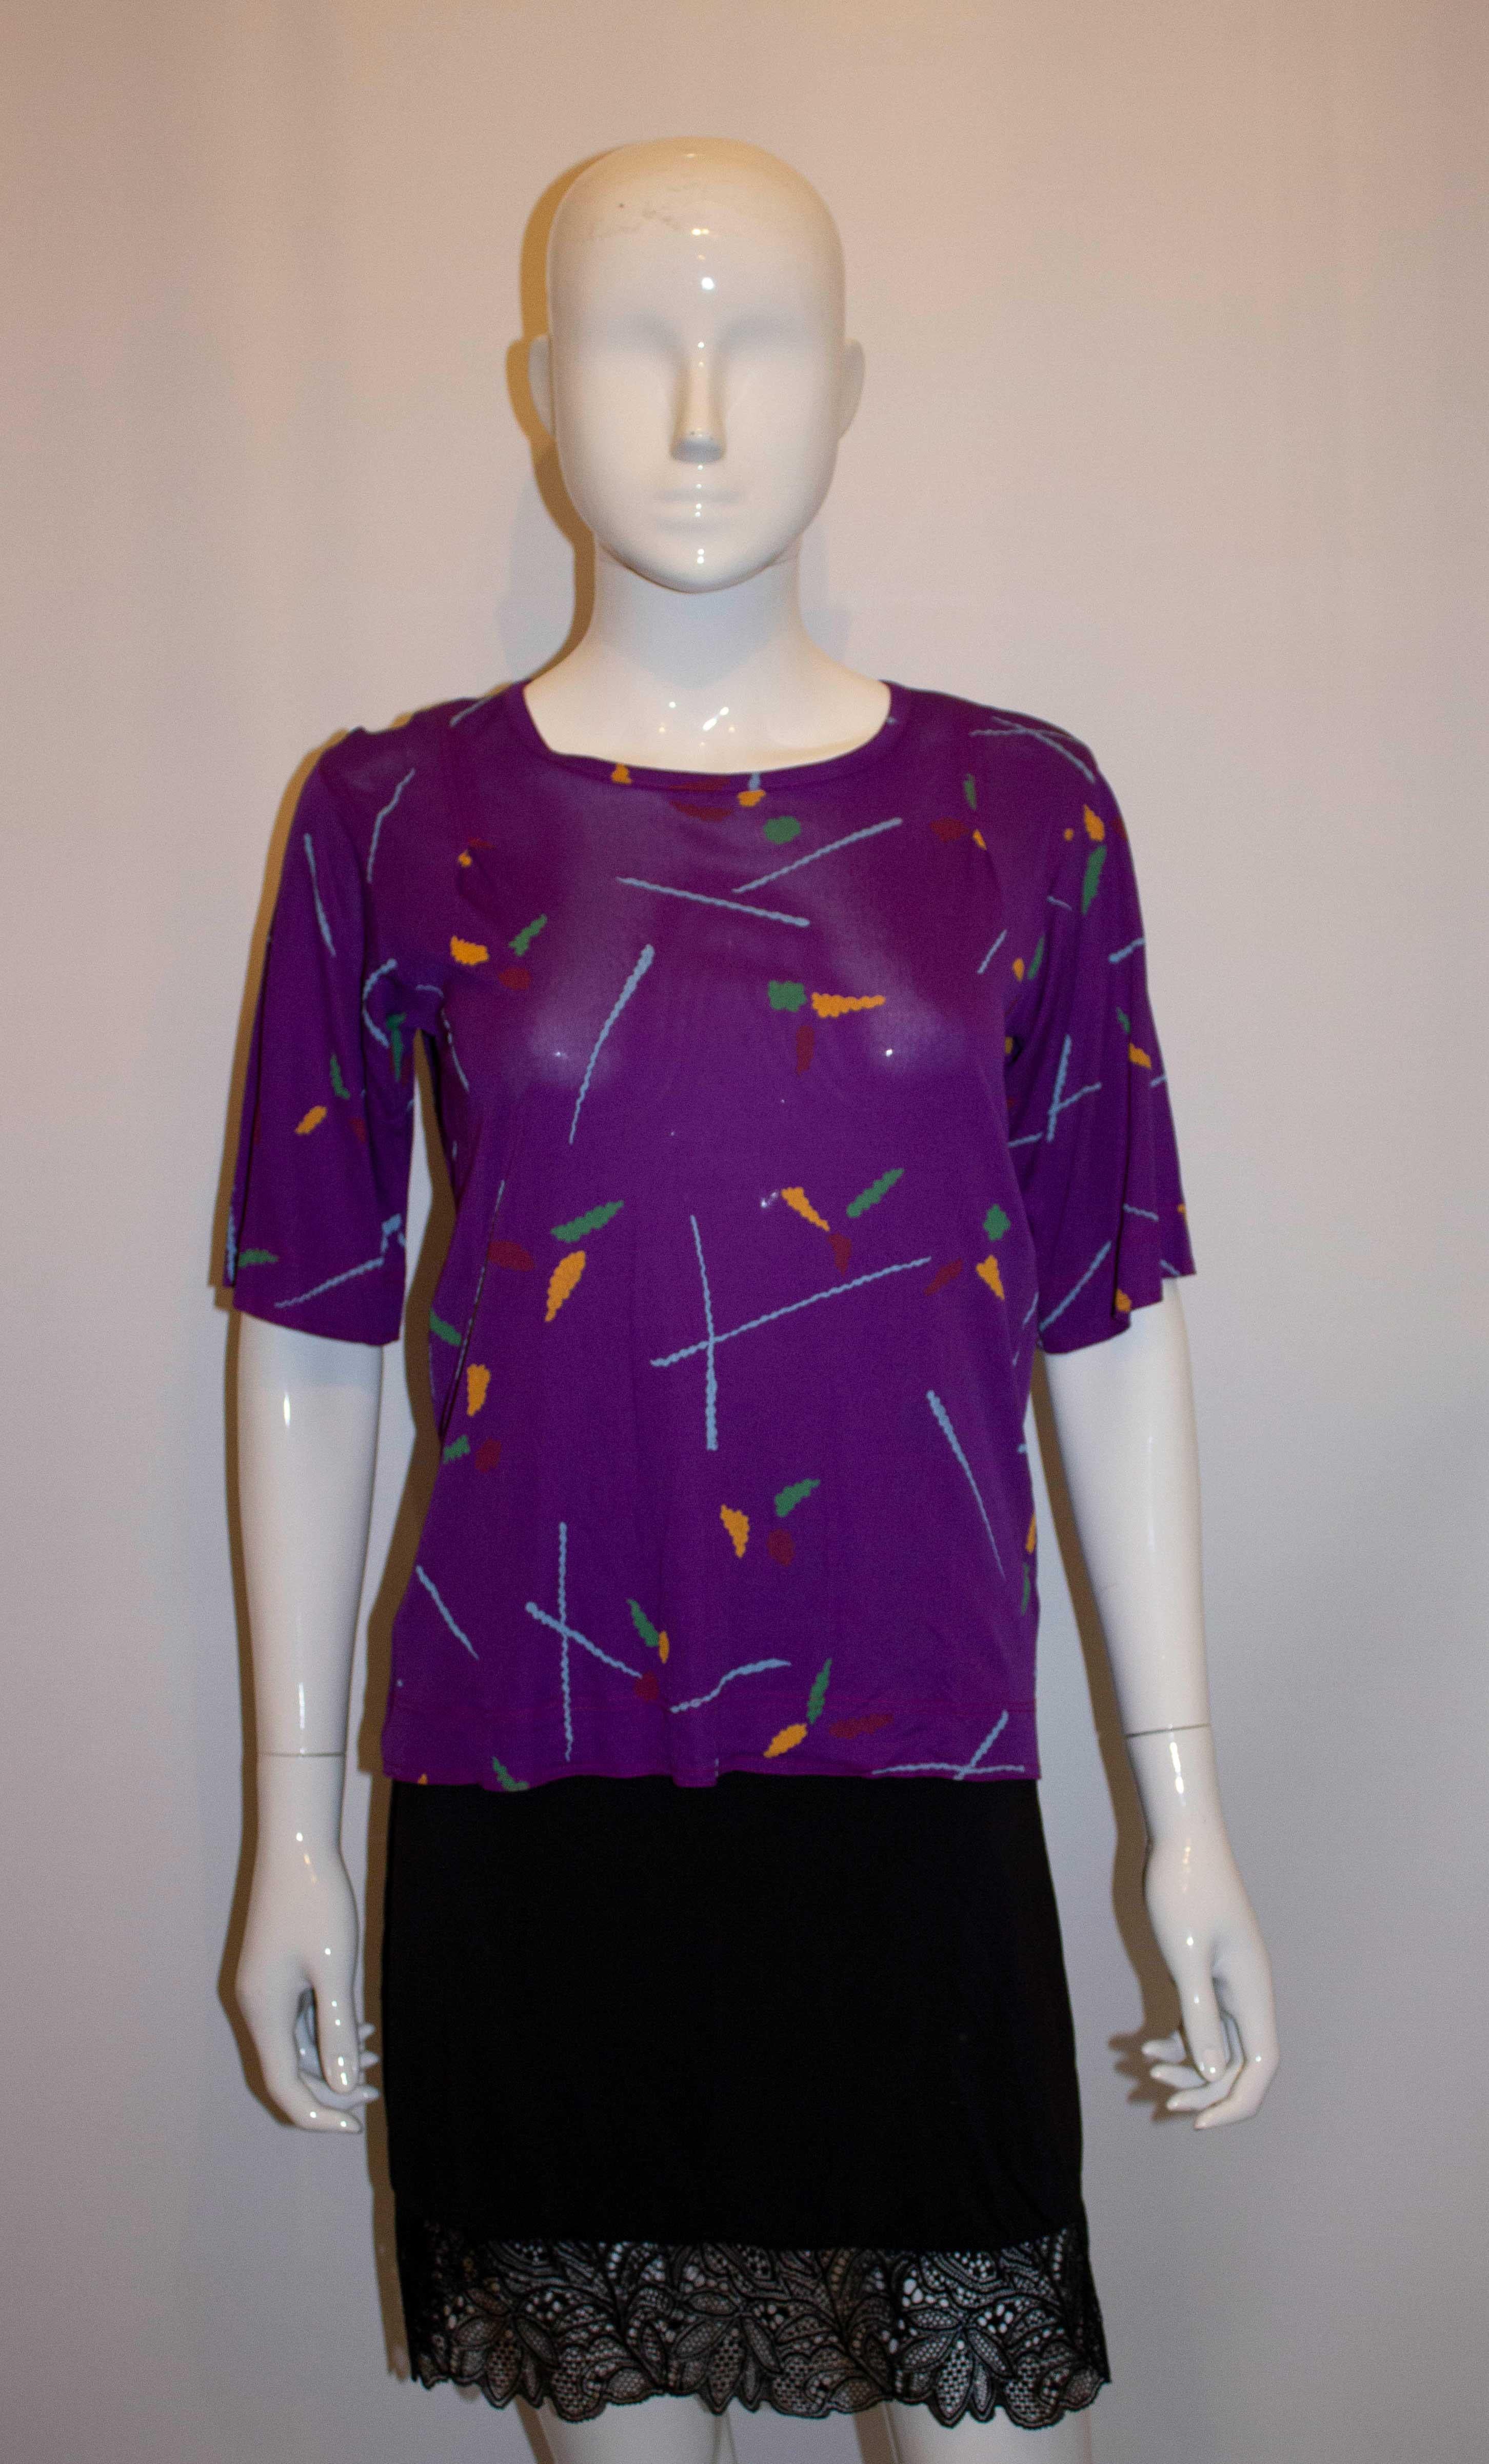 Vintage Jean Muir Printed Top In Good Condition For Sale In London, GB